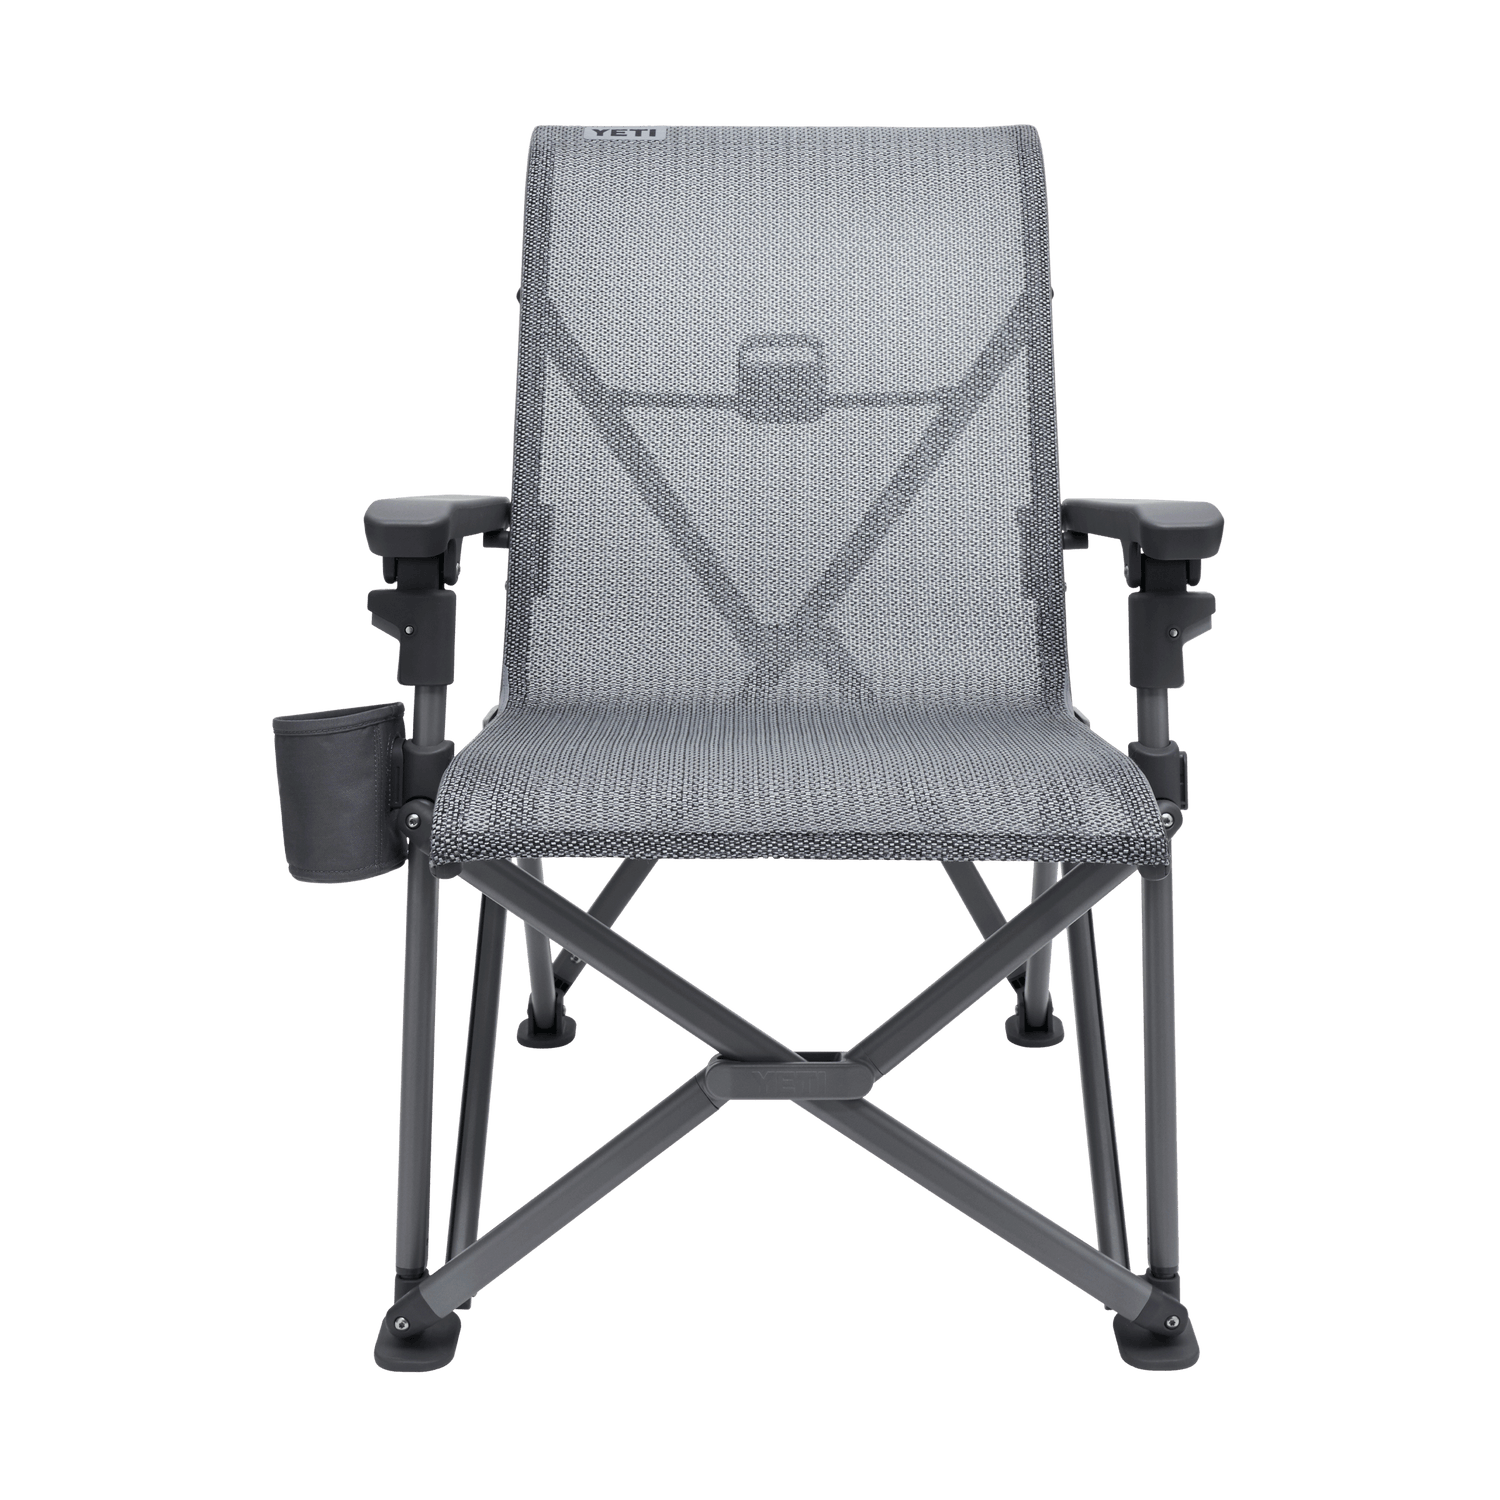 Take a Seat on the YETI Base Camp Hondo Chair